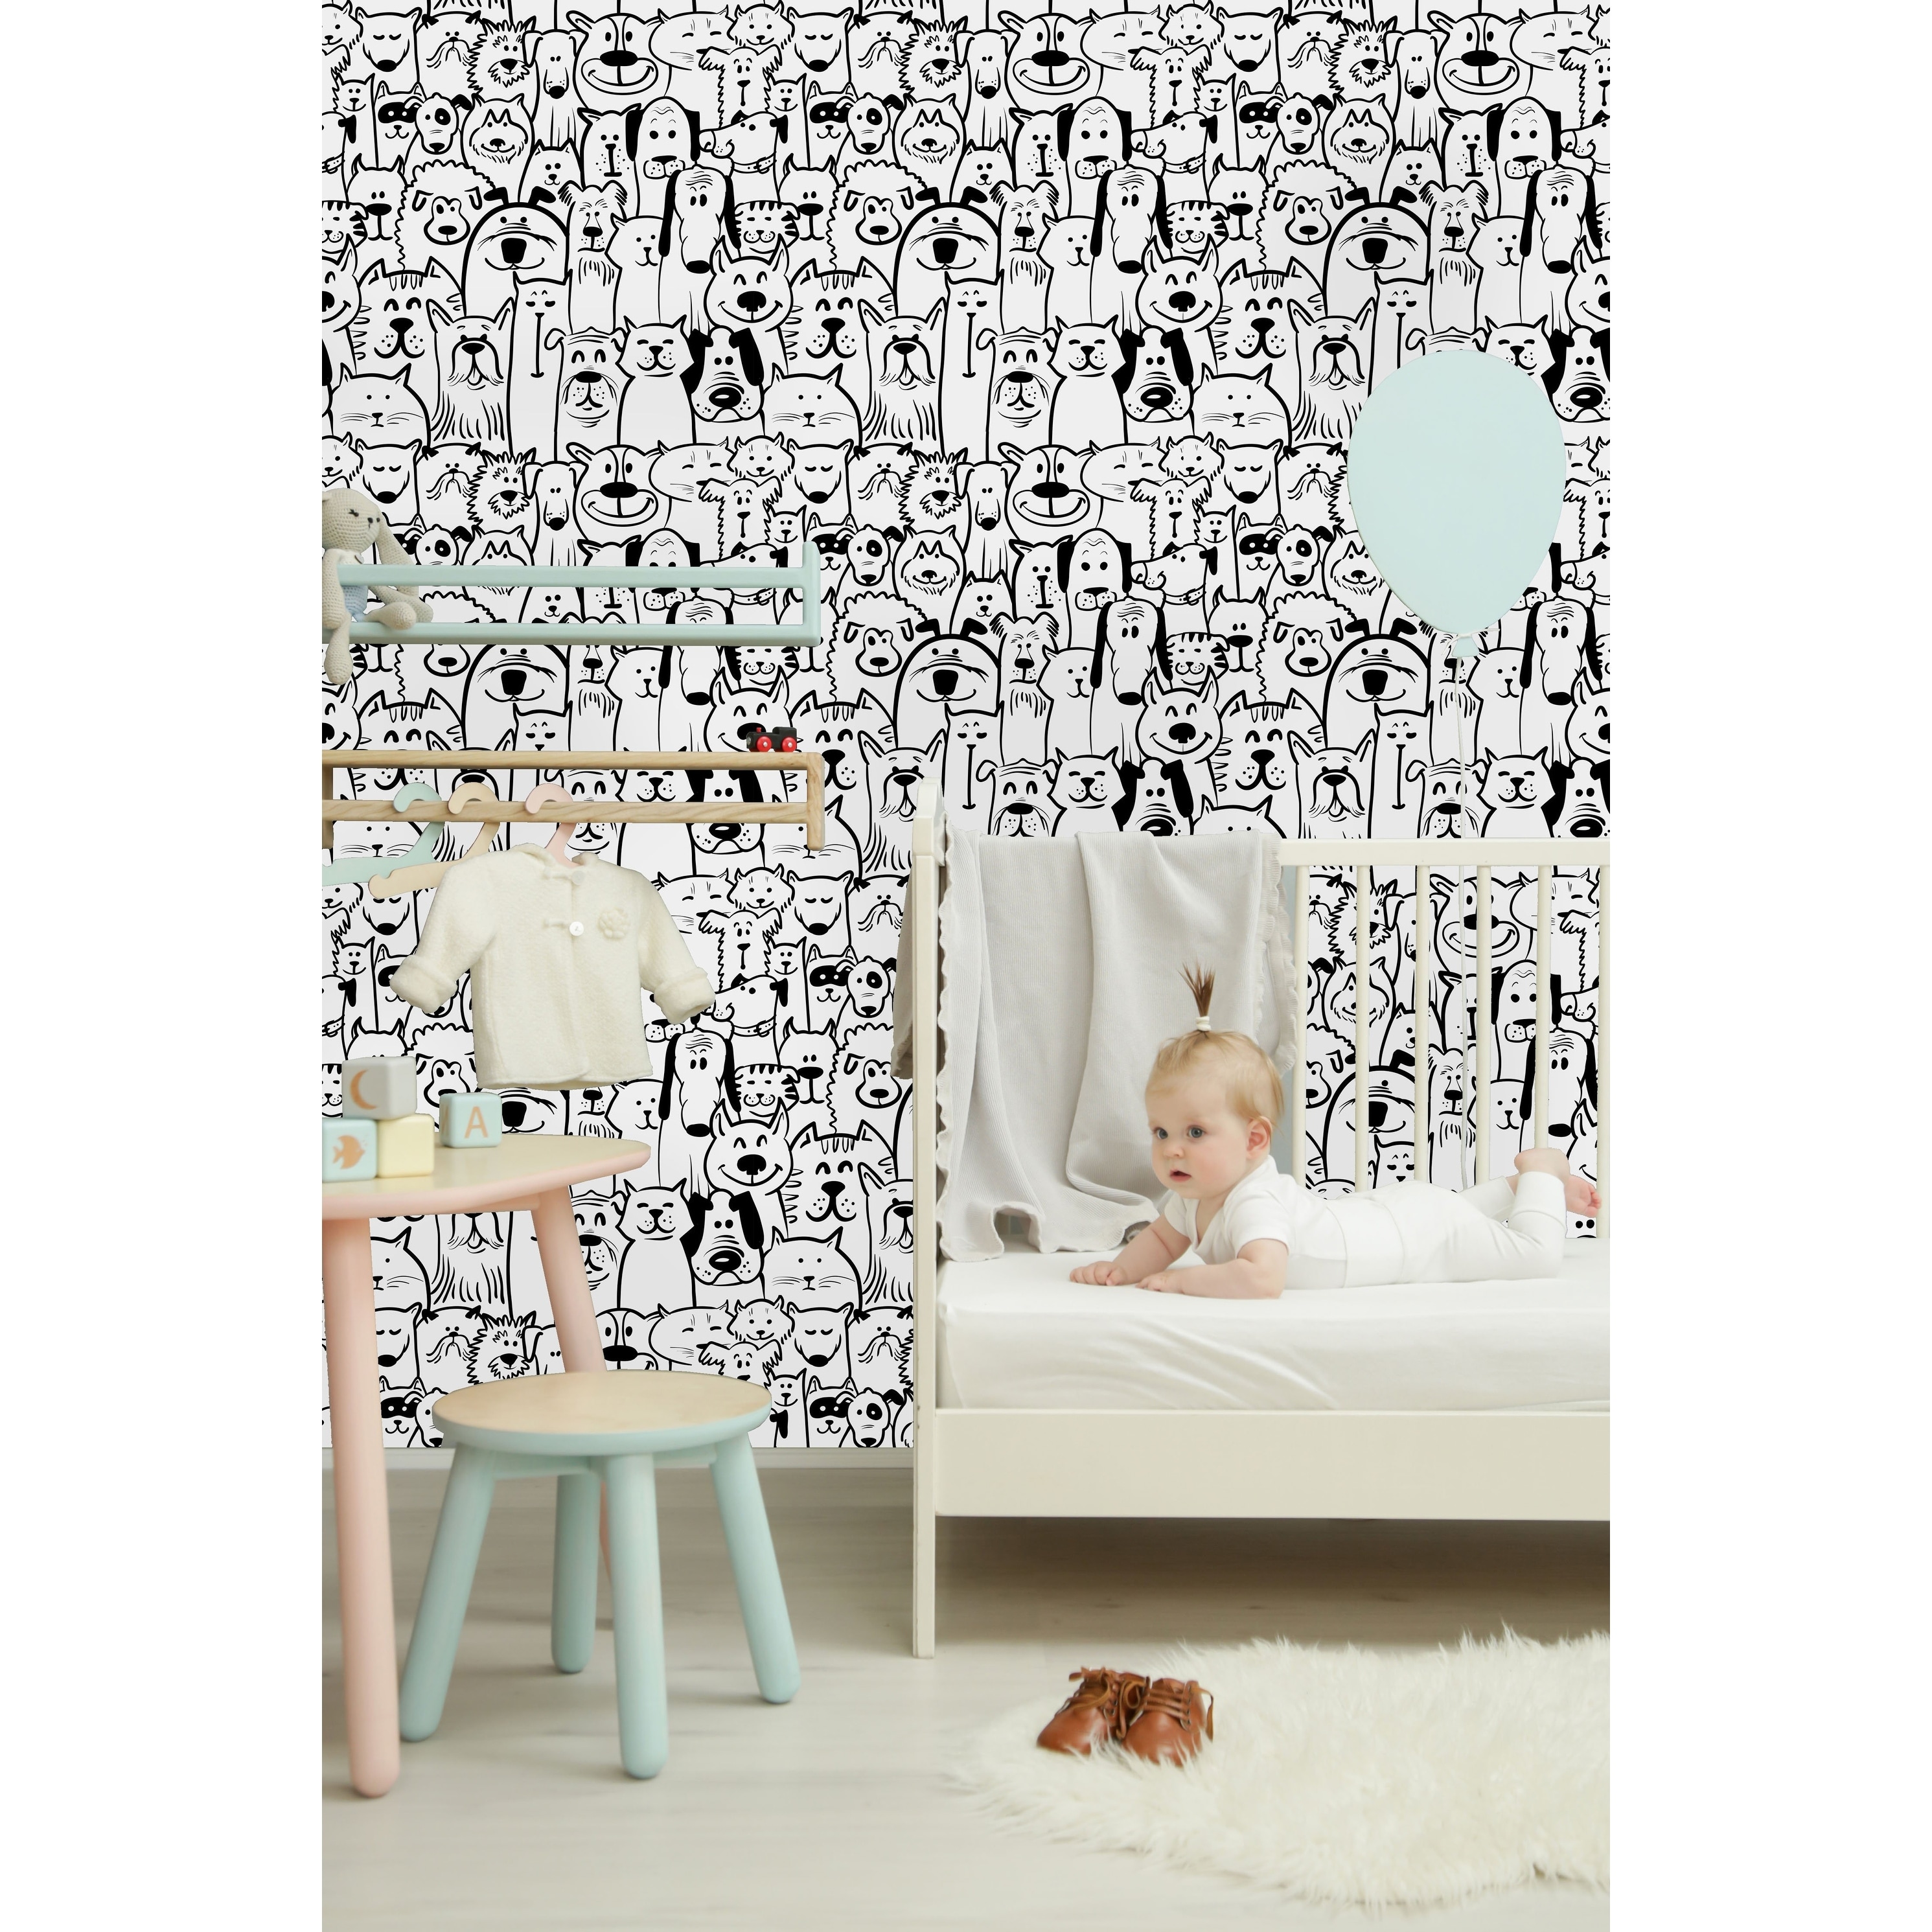 Ebern Designs Lugent Space Cats Removable Peel and Stick Wallpaper Roll   Wayfair